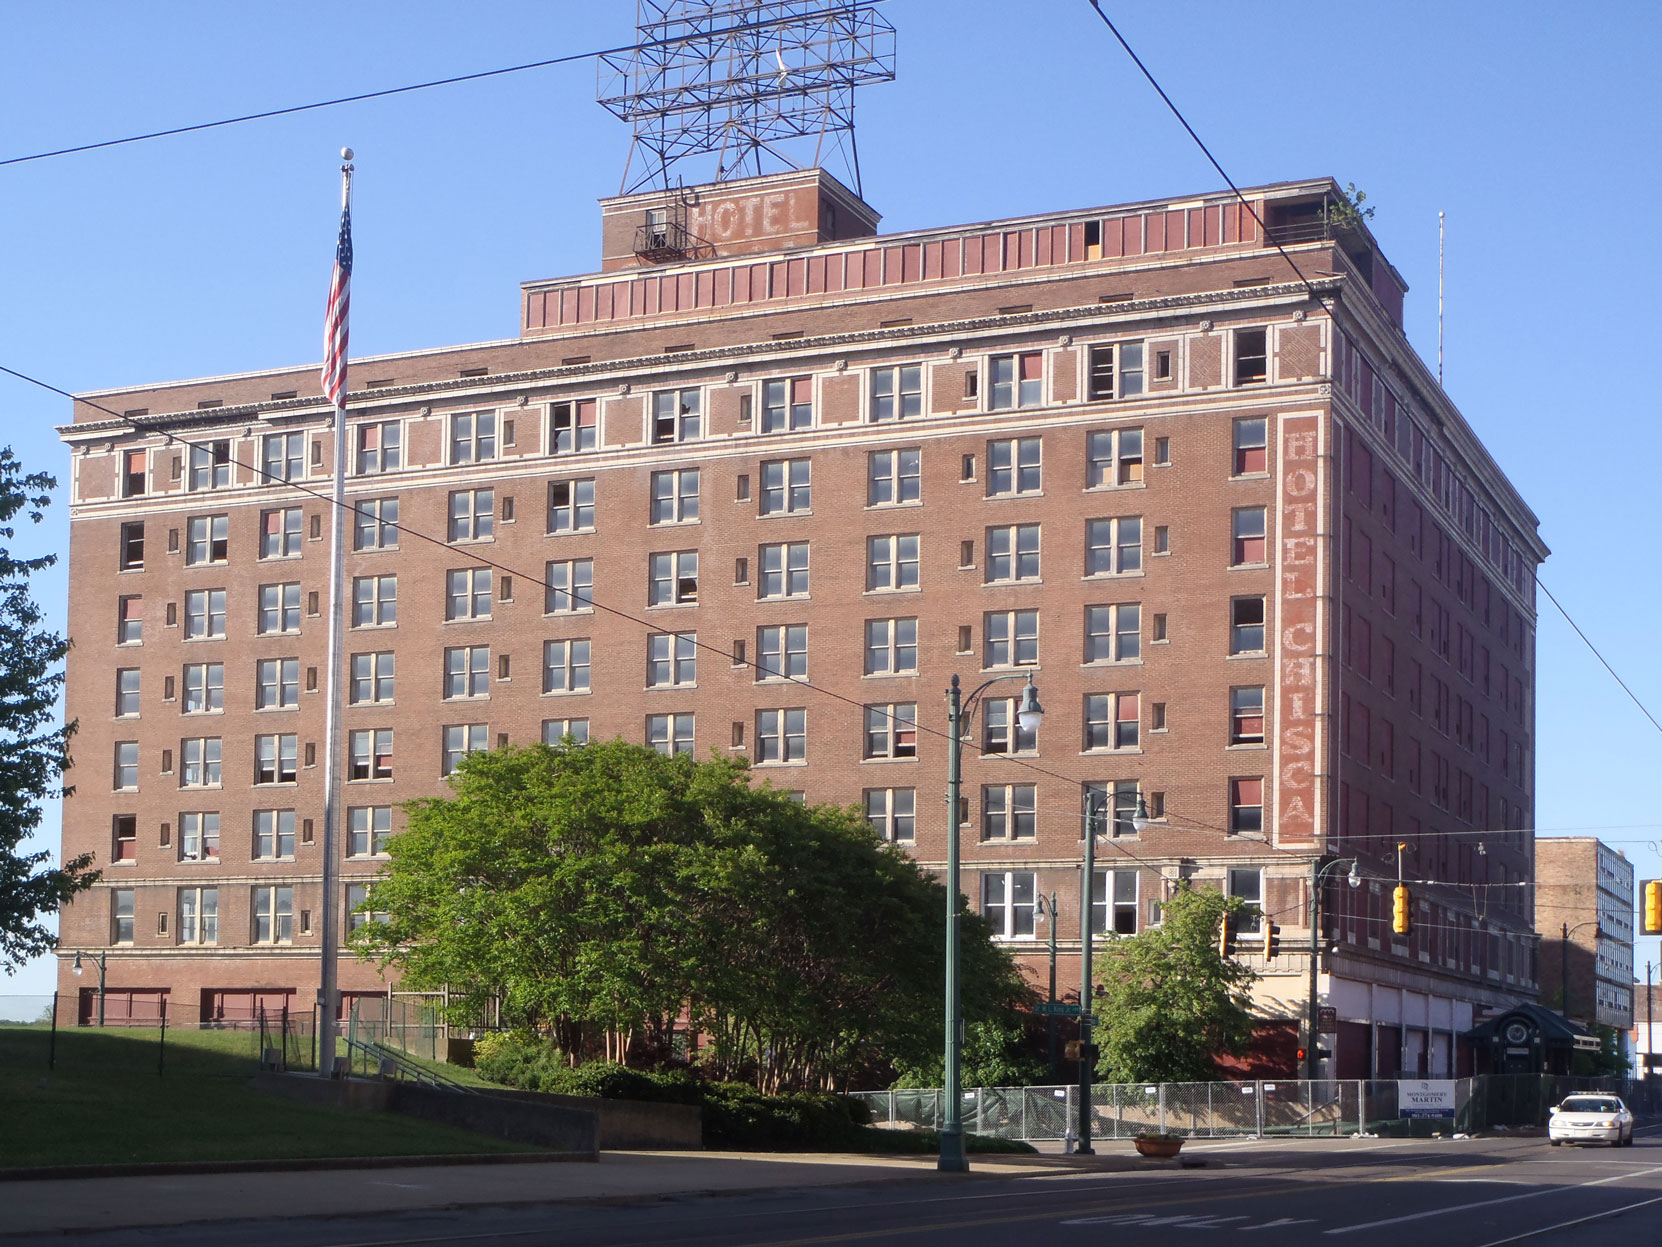 The former Hotel Chisca in downtown Memphis, 2014. (photo: Mississippi Blues Travellers)